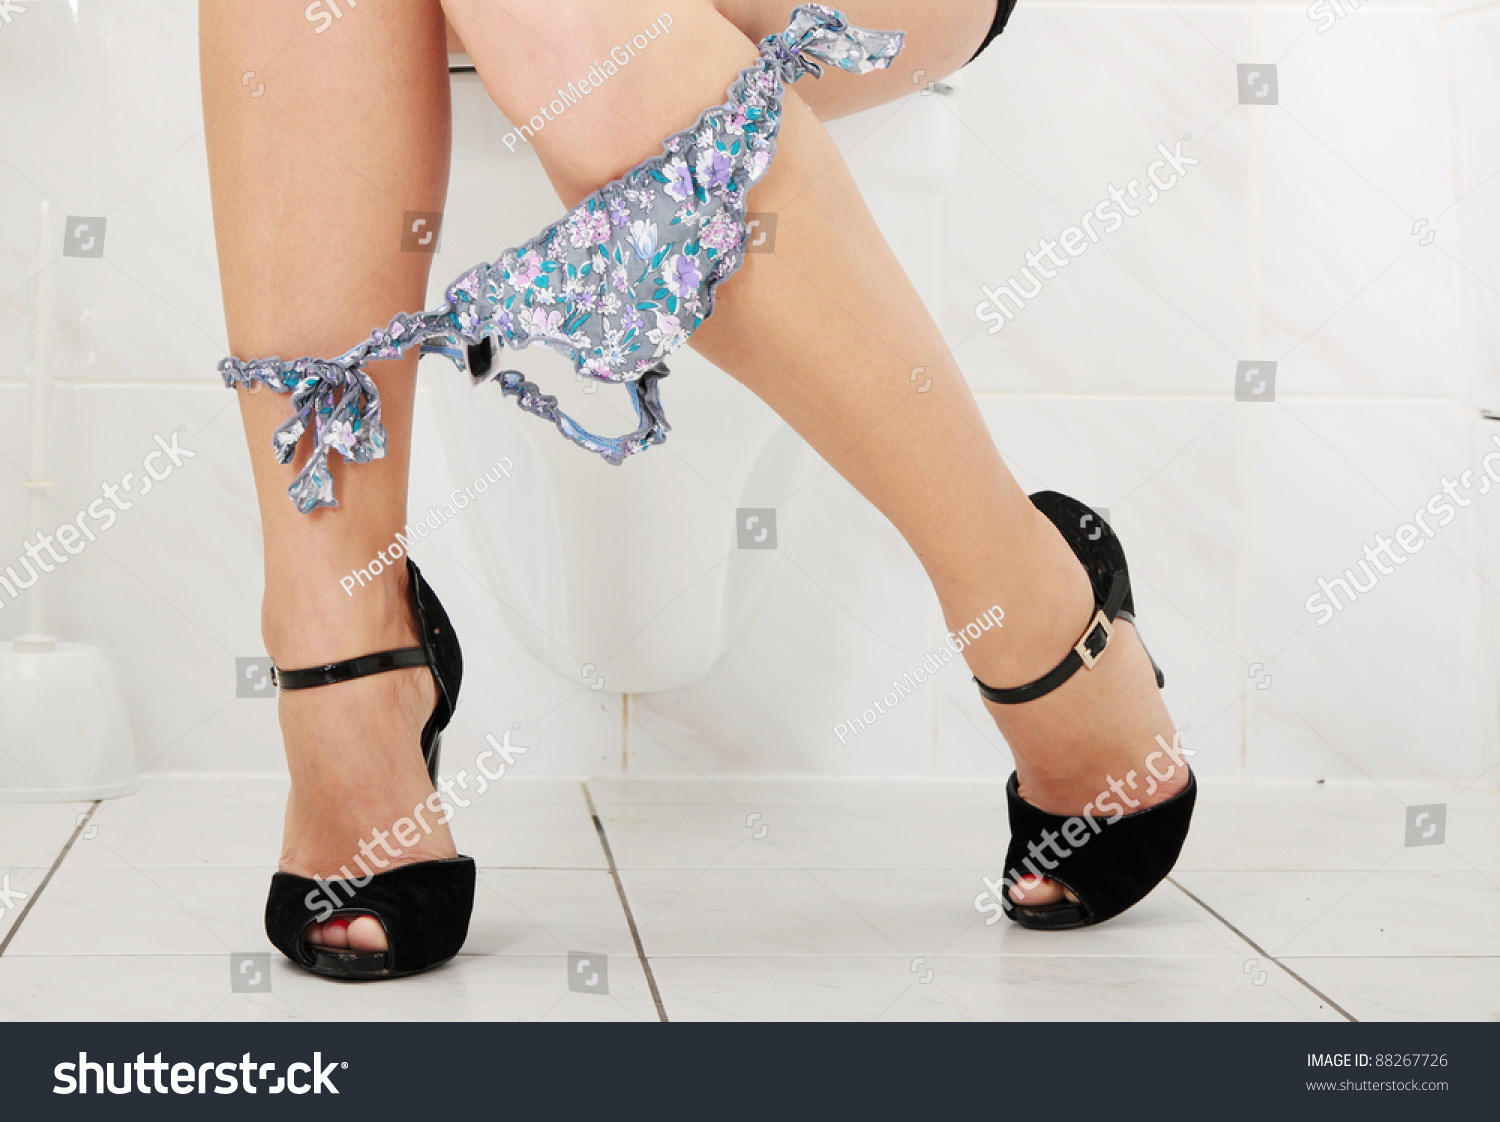 woman sitting on toilet Stock photo and royalty-free 